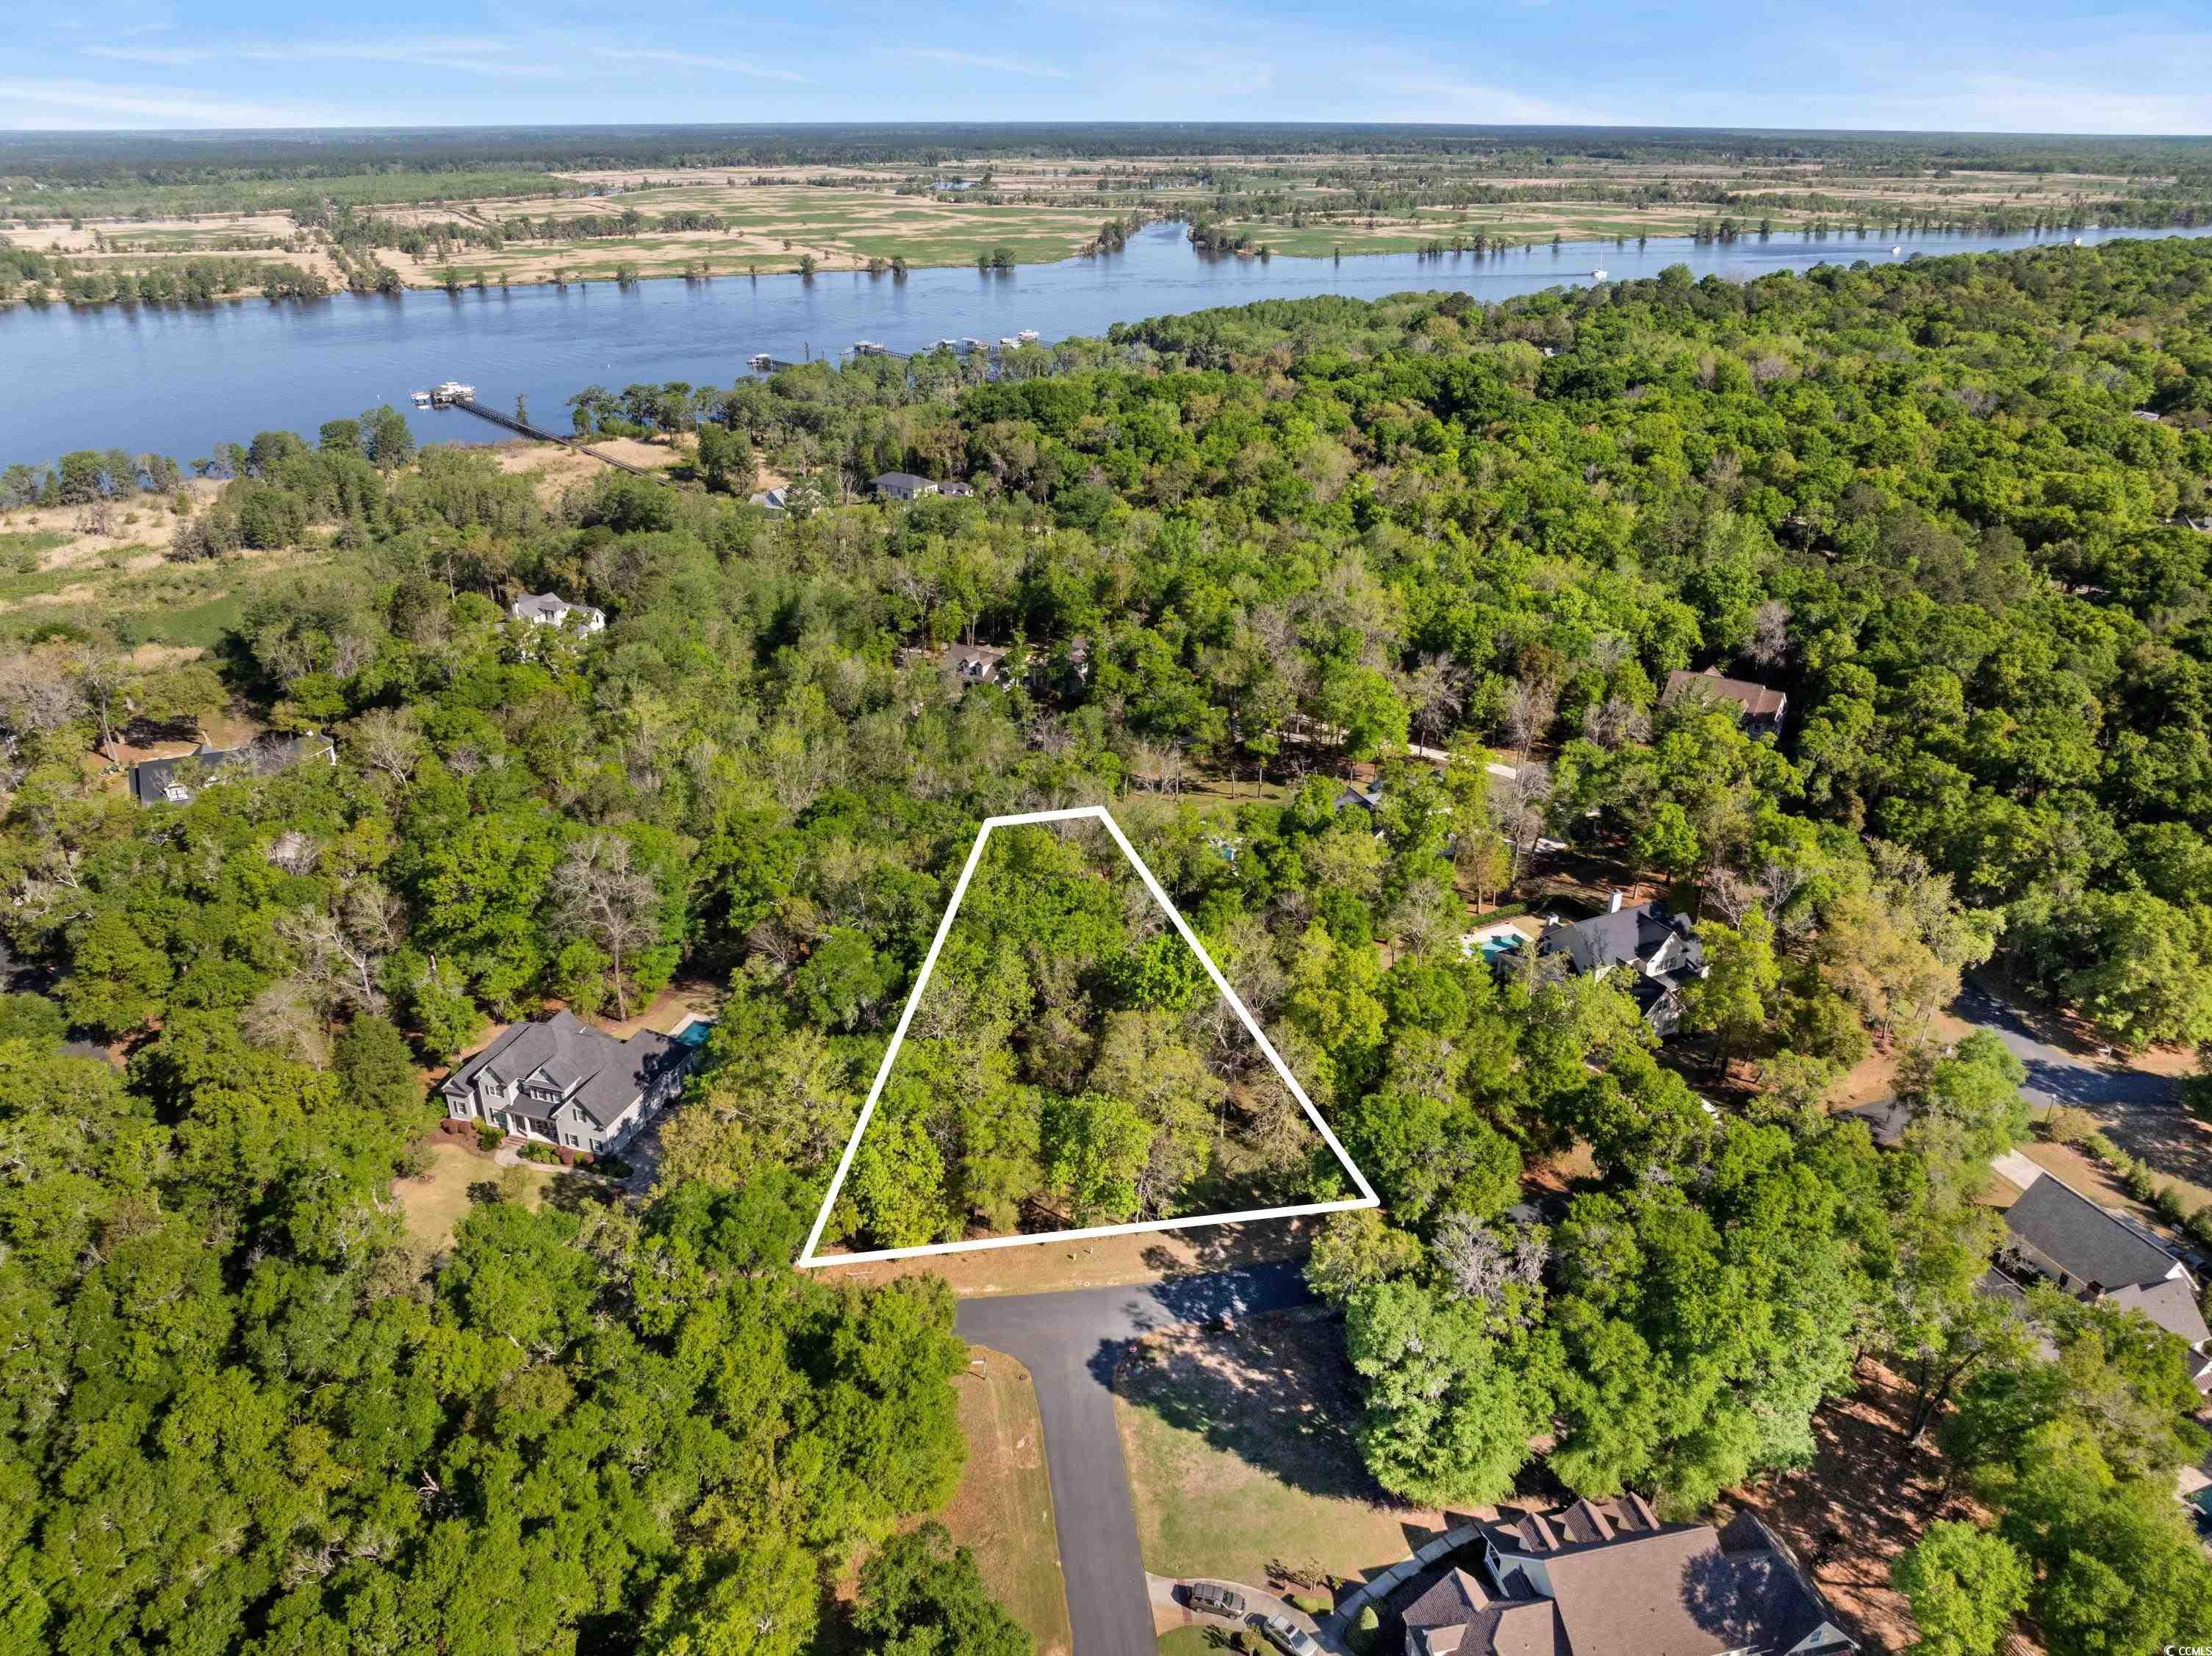 live the coastal lifestyle on this acre-plus wooded lot within the beautiful community of allston river bluffs. property owners enjoy gated access, low hoa and exclusive use of a private riverfront marina. each of the 20 community home-sites has an assigned boat slip with water and electric, providing easy access to the waccamaw river - a segment of the intra-coastal waterway. the charming open-air community lodge near the marina offers a built-in wood-burning fireplace and breathtaking sunset views over the river. convenient to schools, medical facilities, shopping, restaurants and award-winning golf courses as well as to some of the finest beaches along the east coast.